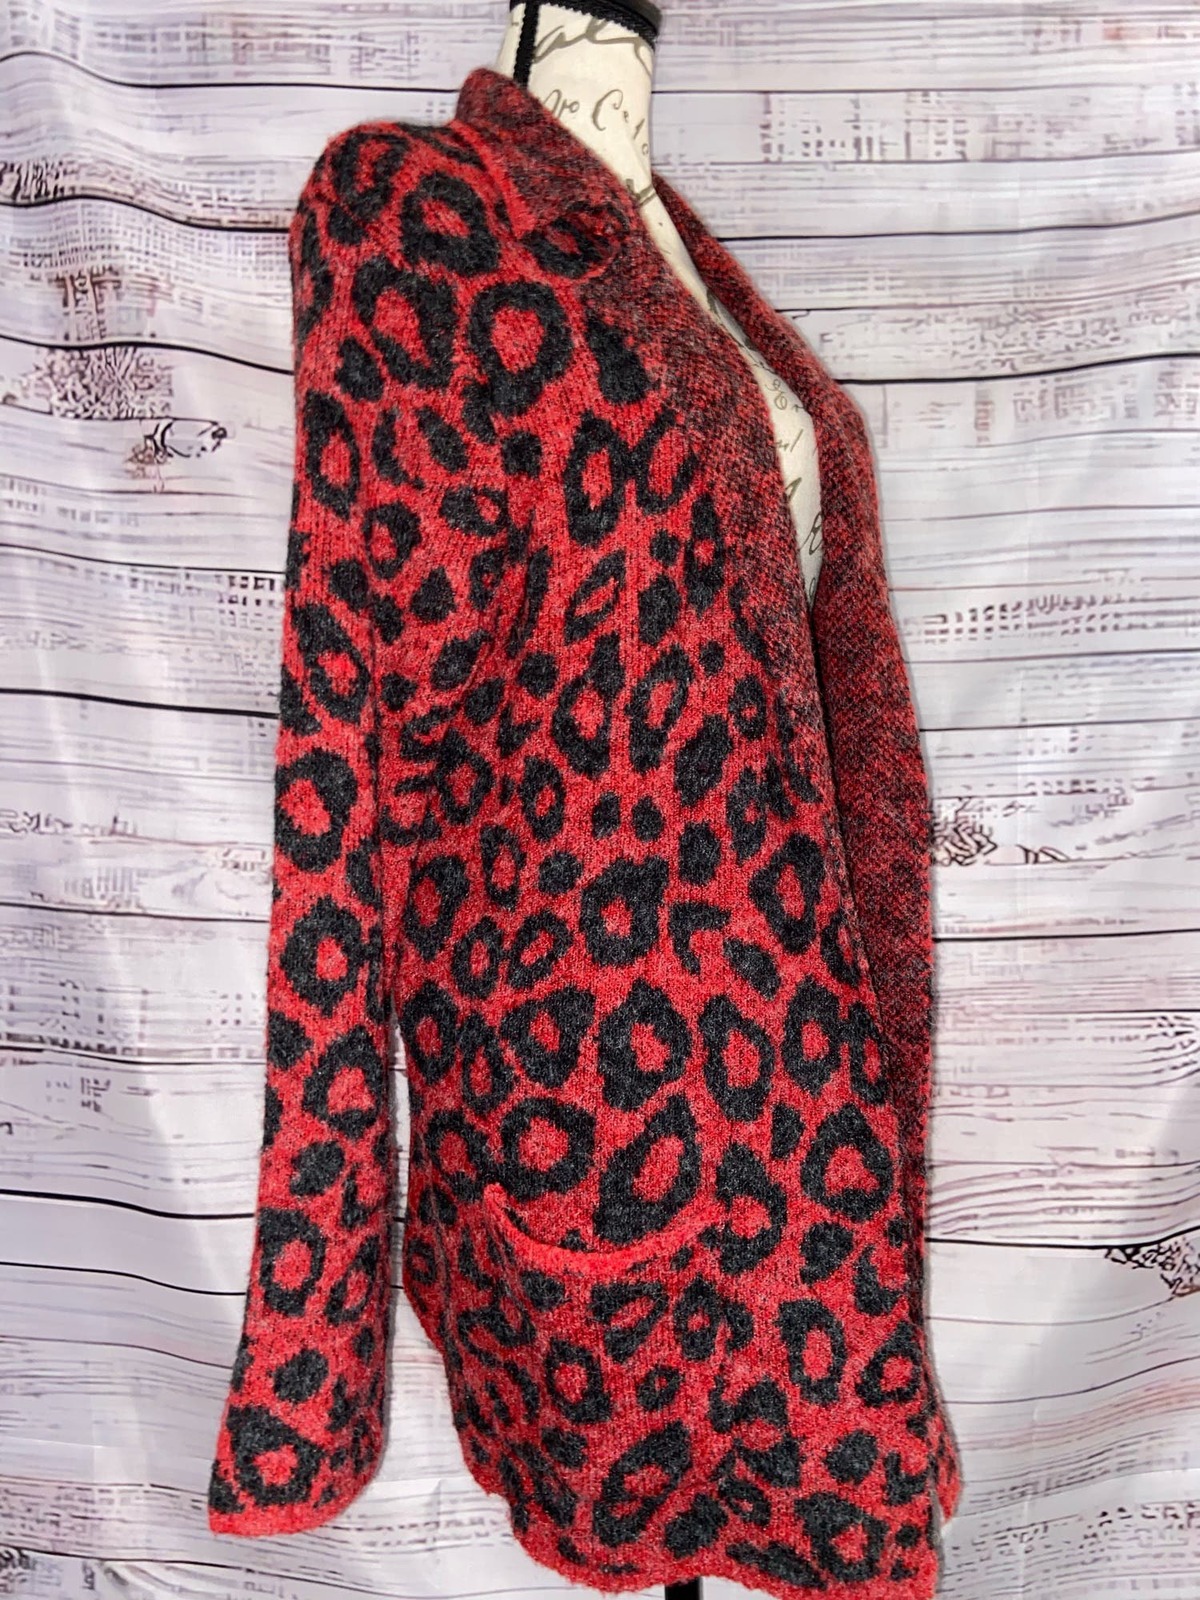 Primary image for Joseph A Open Front Leopard Cardigan Womens M Red Black Long Sleeve Fuzzy Pocket